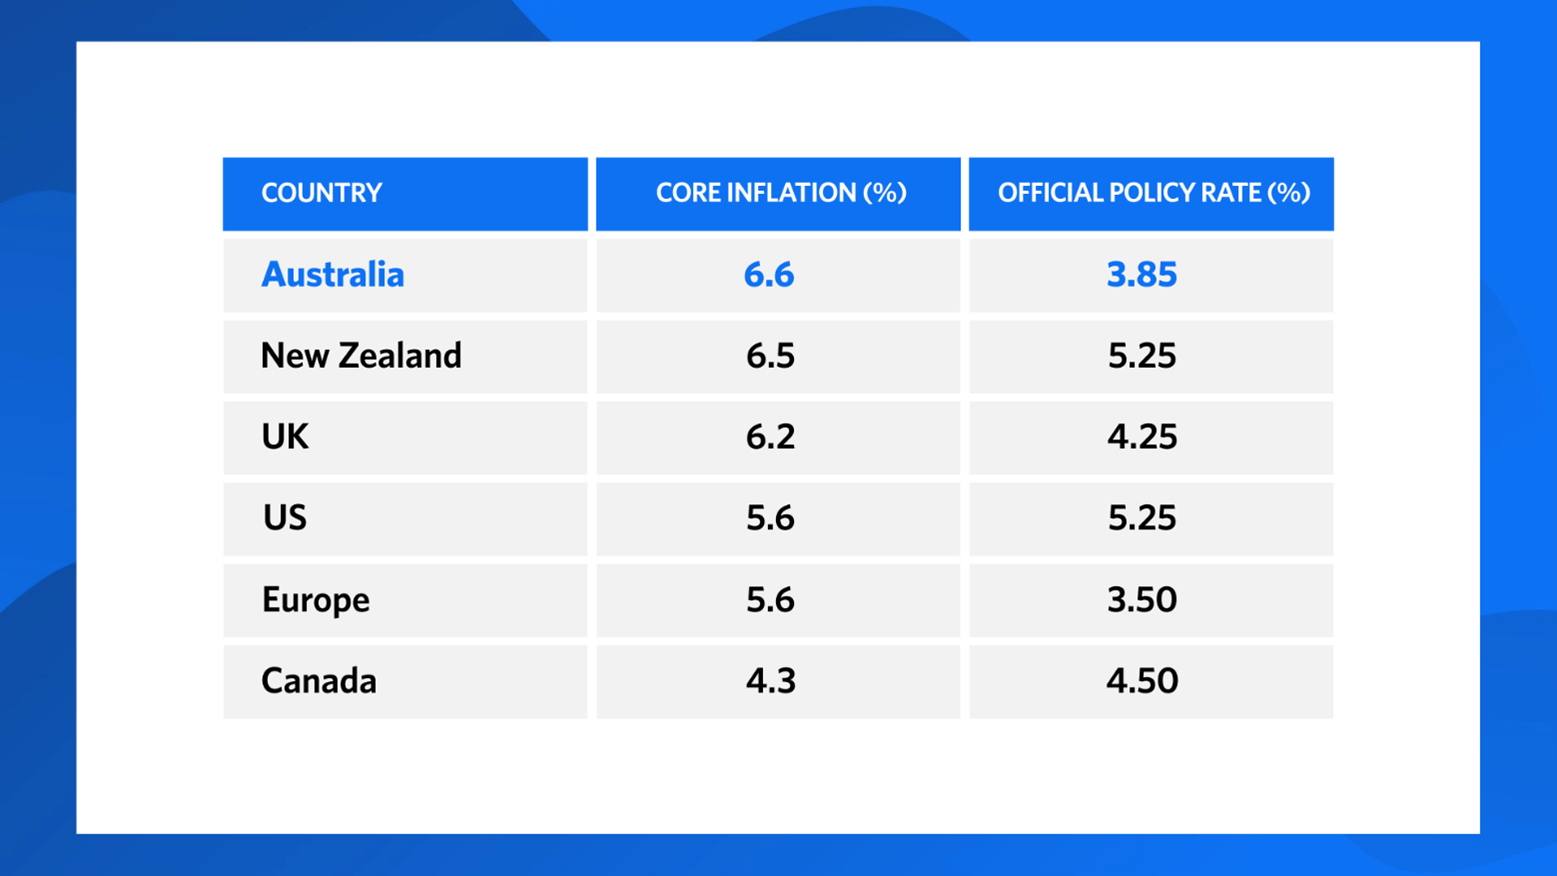 Image 3: A table showing Australia’s core inflation at the highest at 6.6%, followed by New Zealand at 6.5%, UK at 6.2%, US at 5.6%, Europe at 5.6%, and Canada at 4.3%. The table also shows that Australia’s official policy rate is one of the lowest at 3.85%, when compared to New Zealand at 5.25%, UK at 4.25%, US at 5.25%, Europe at 3.50%, and Canada at 4.50%.